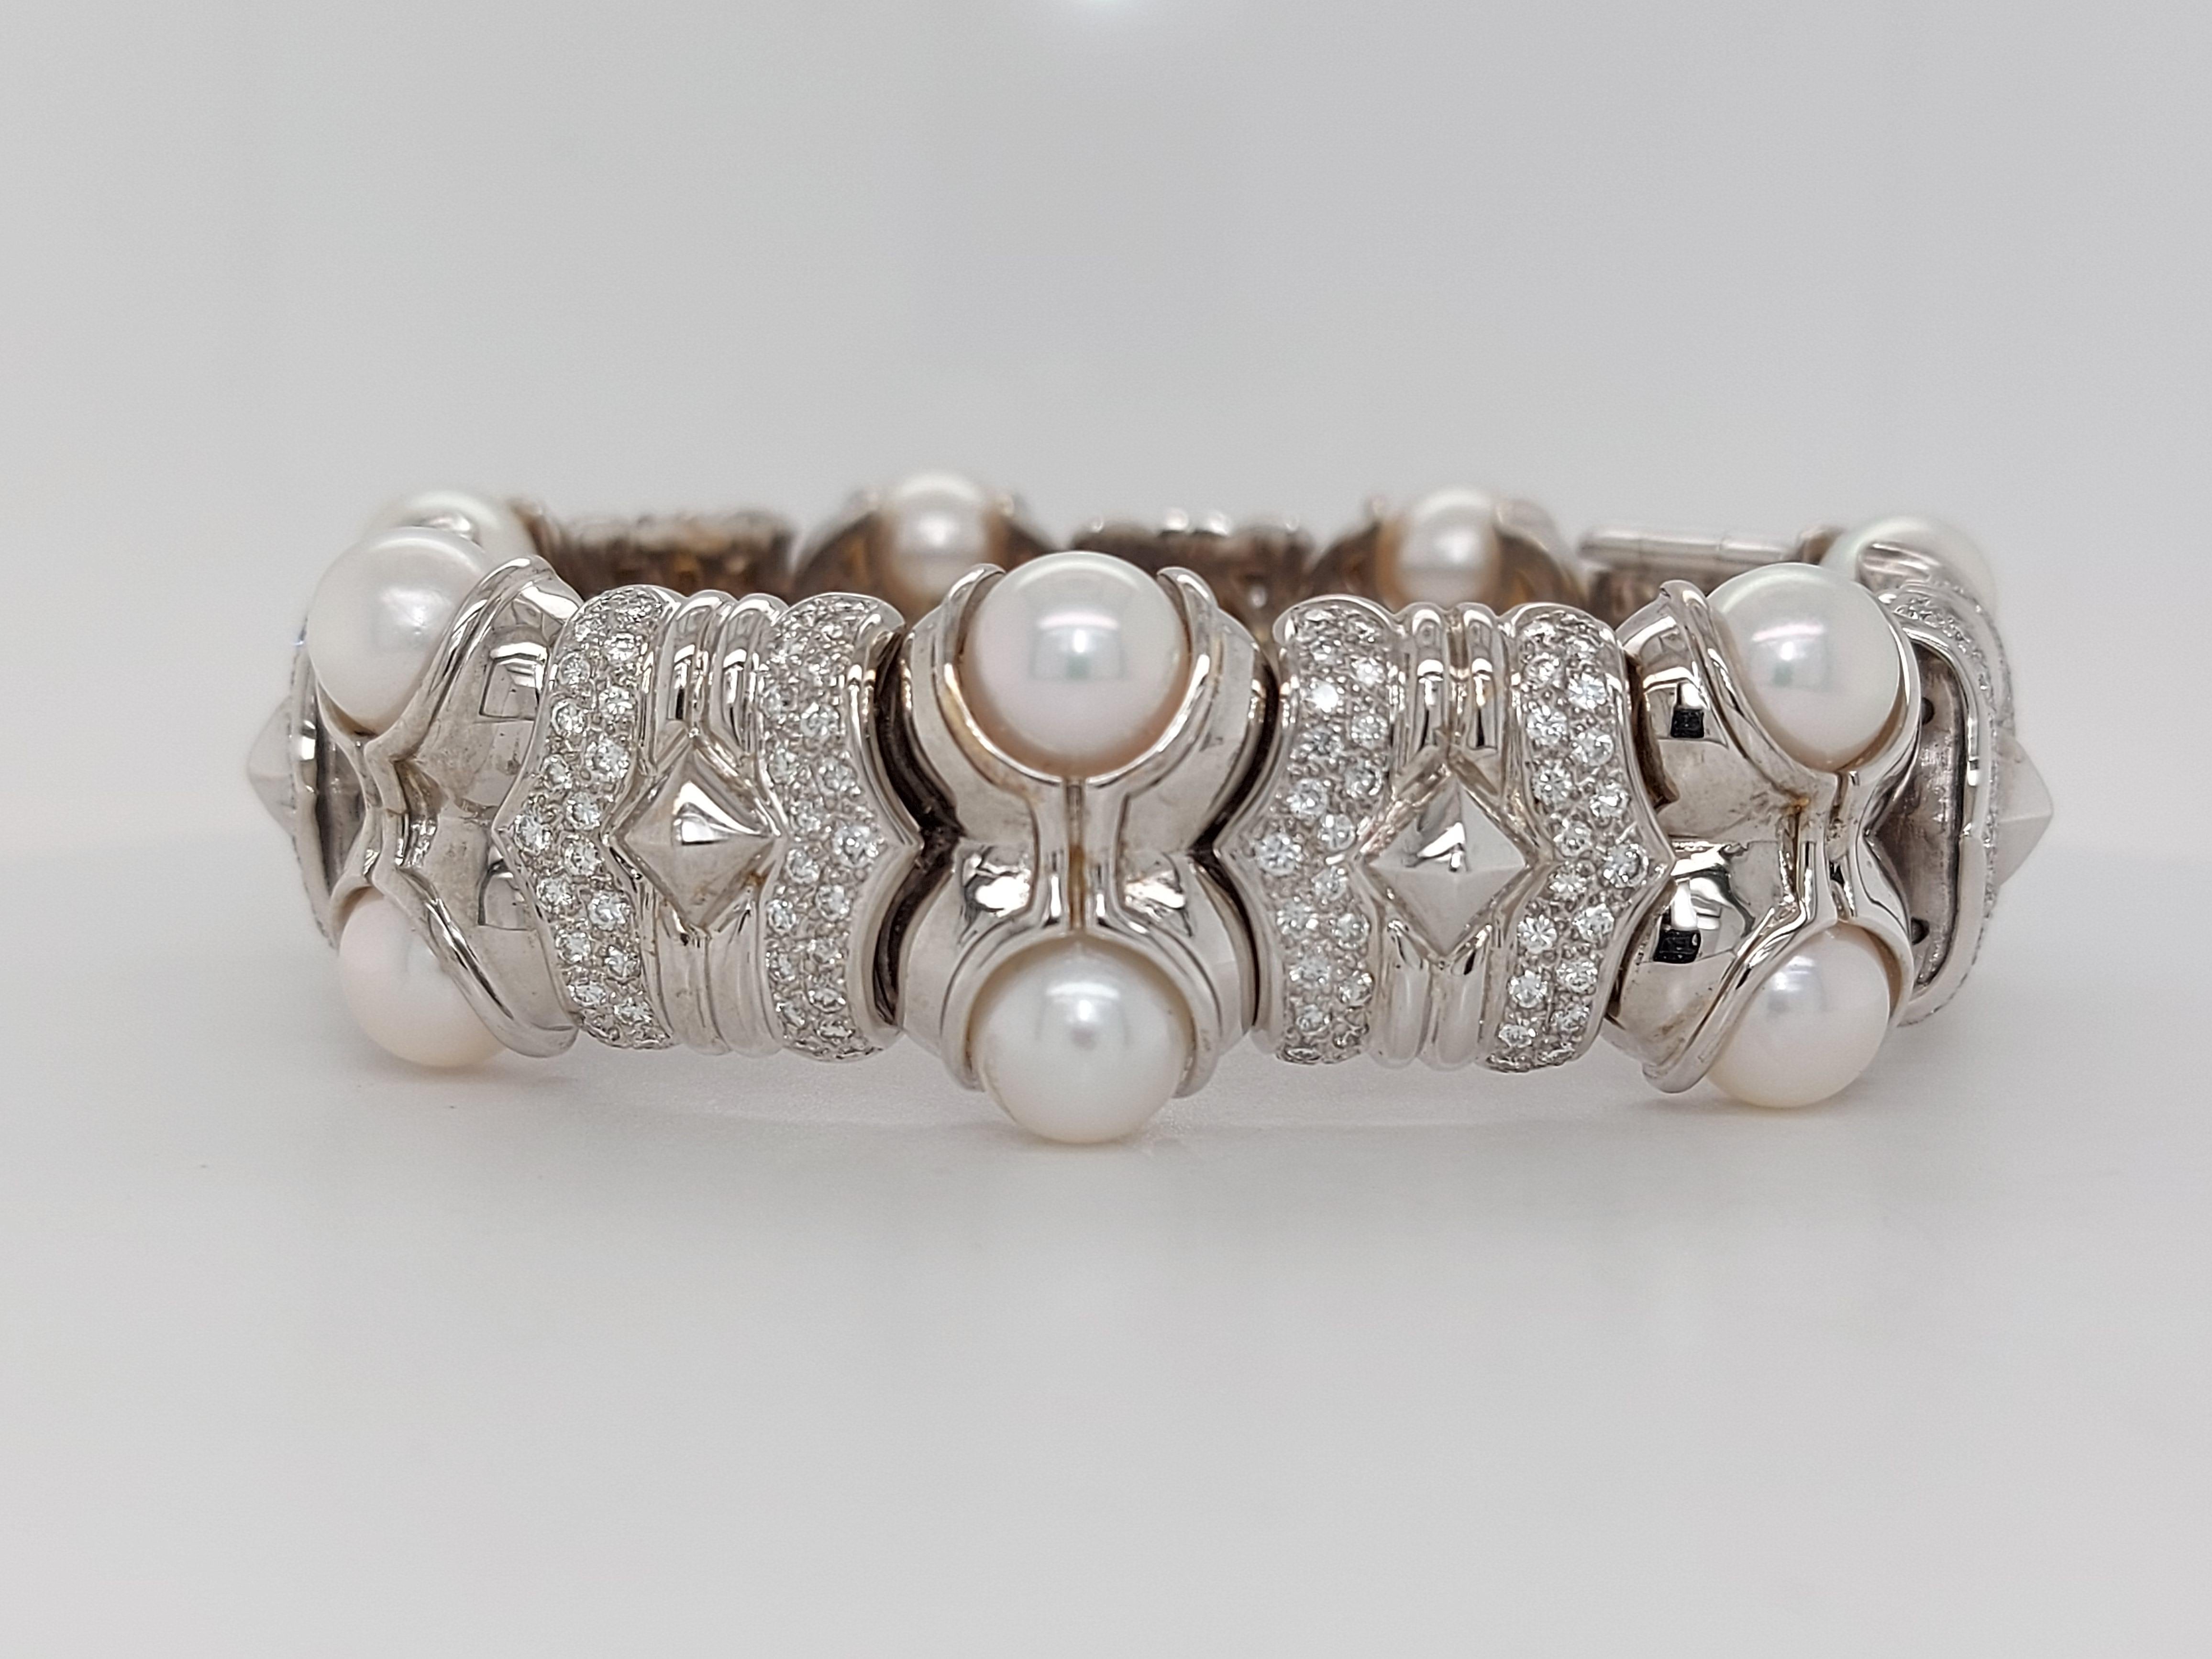 18 Karat White Gold Bracelet with Brilliant Cut Diamonds and Pearls For Sale 1